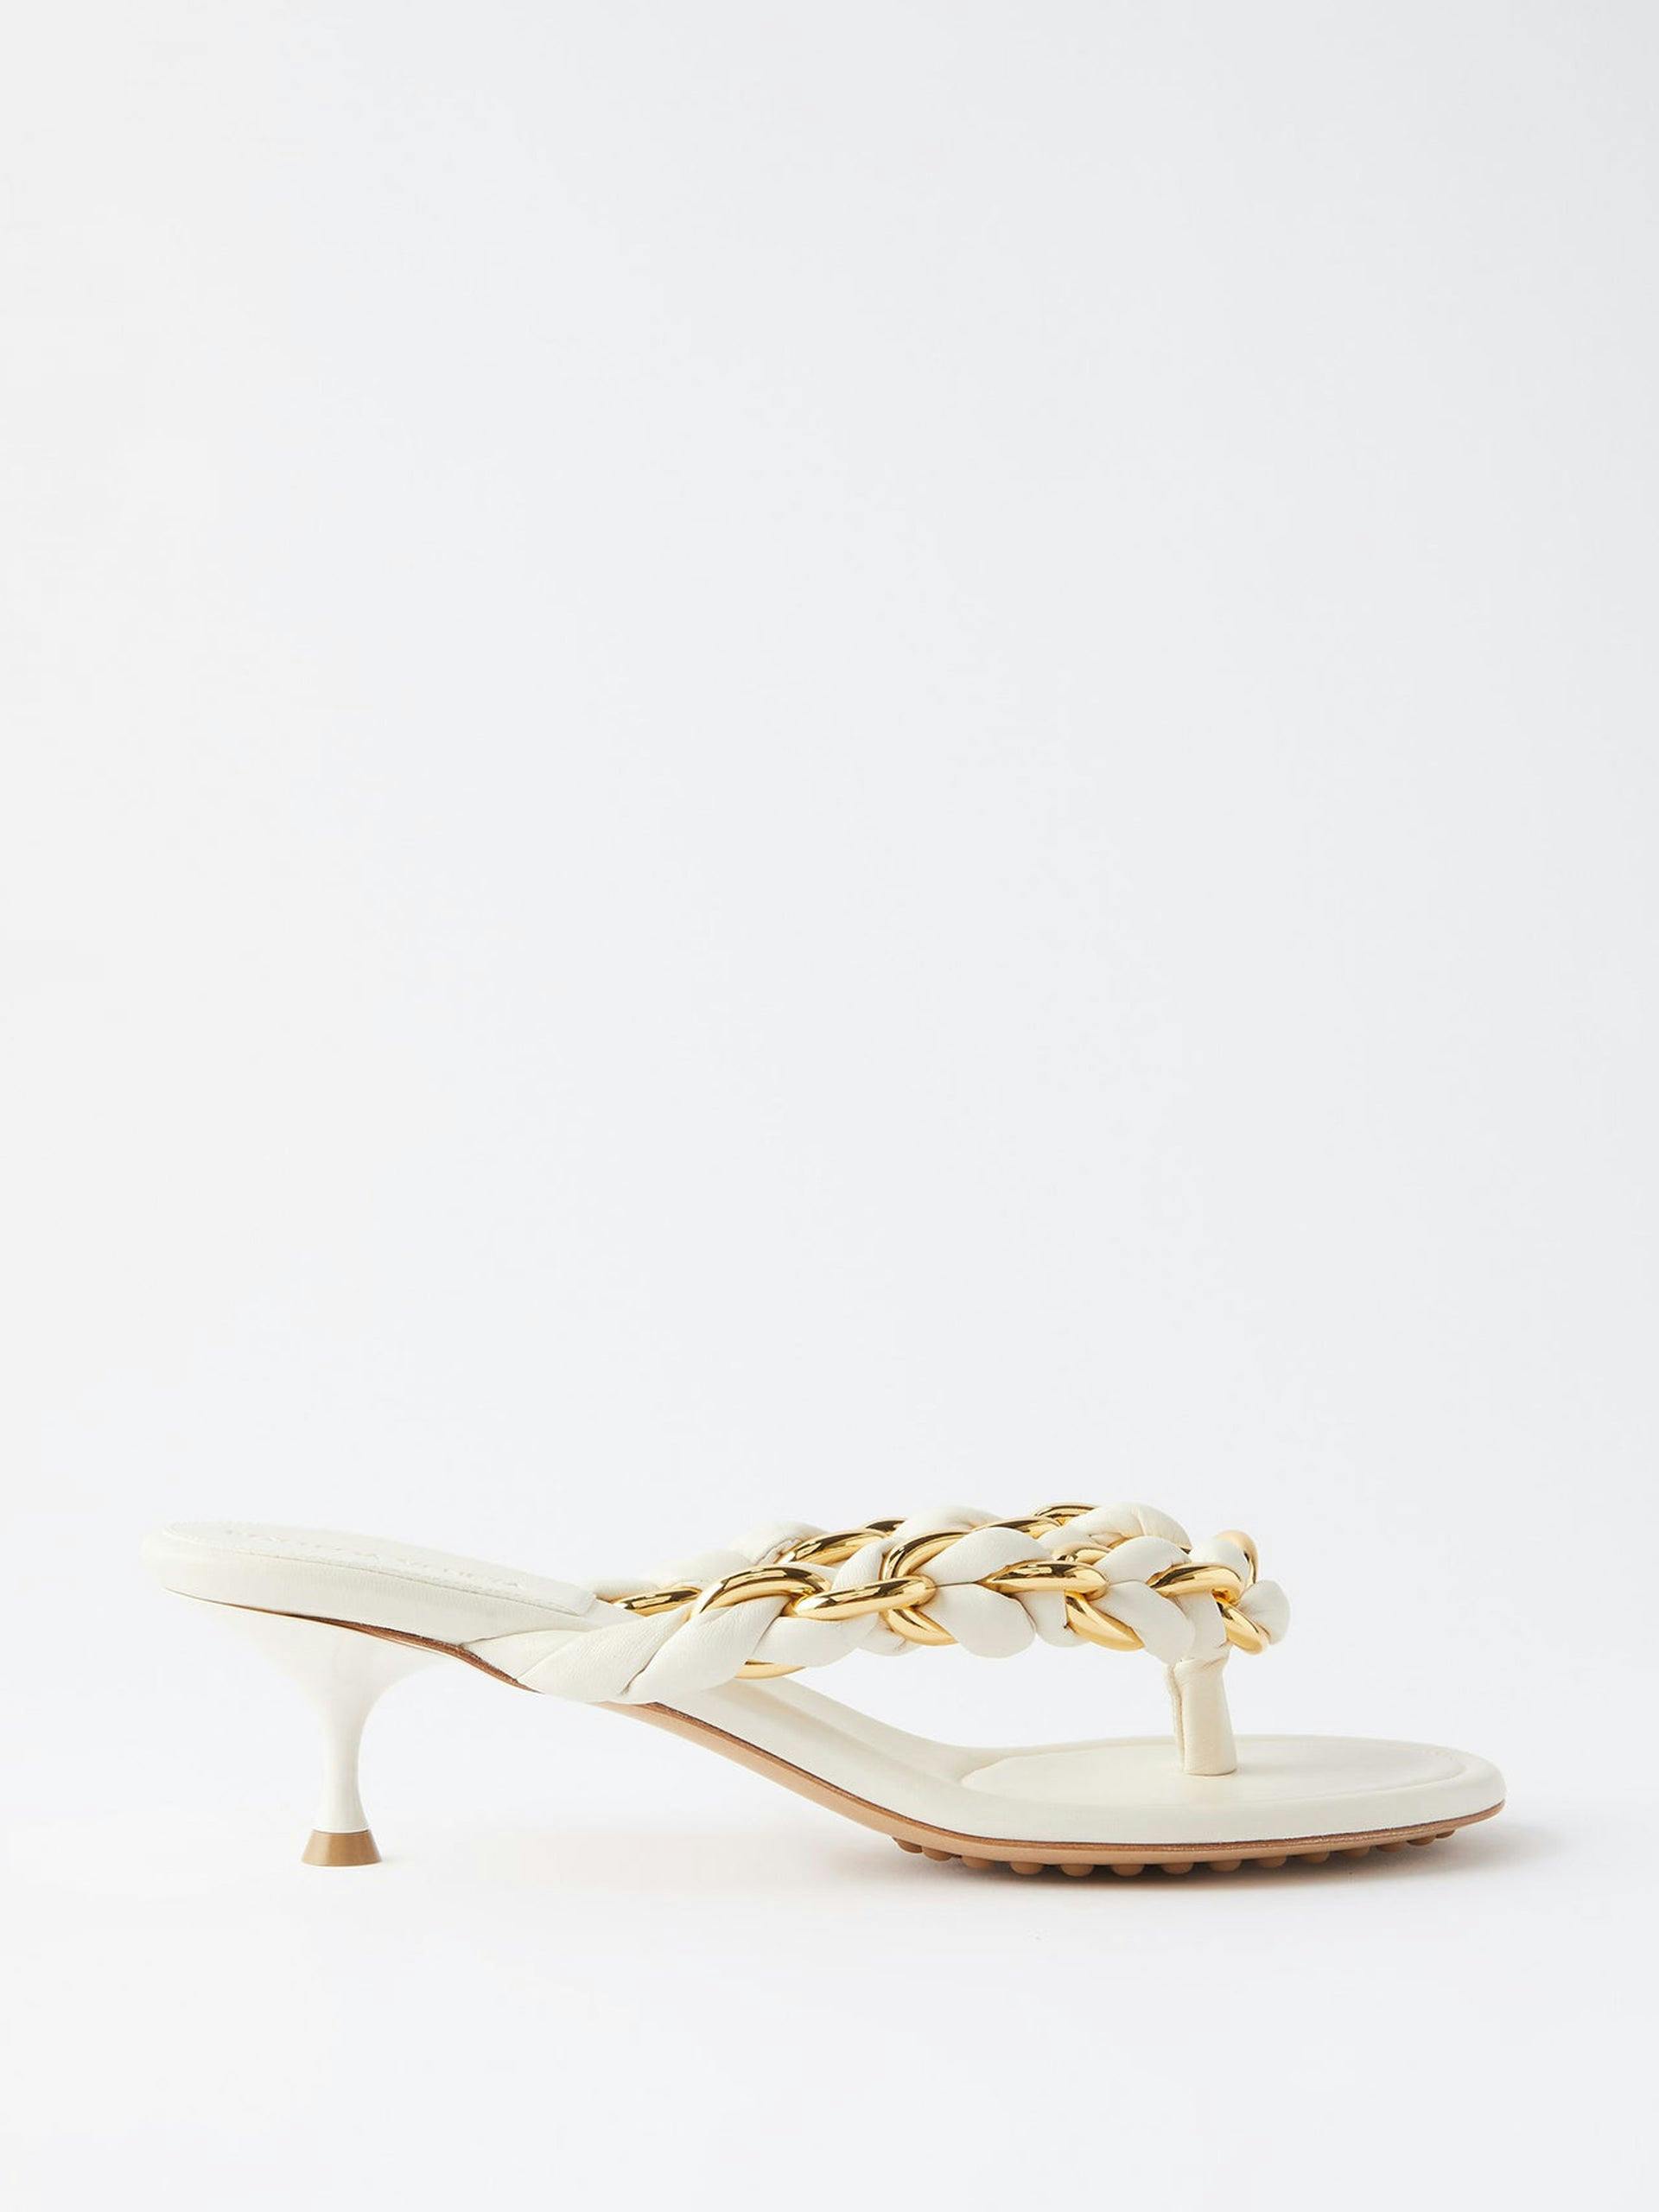 White strap sandals with braided chain detail